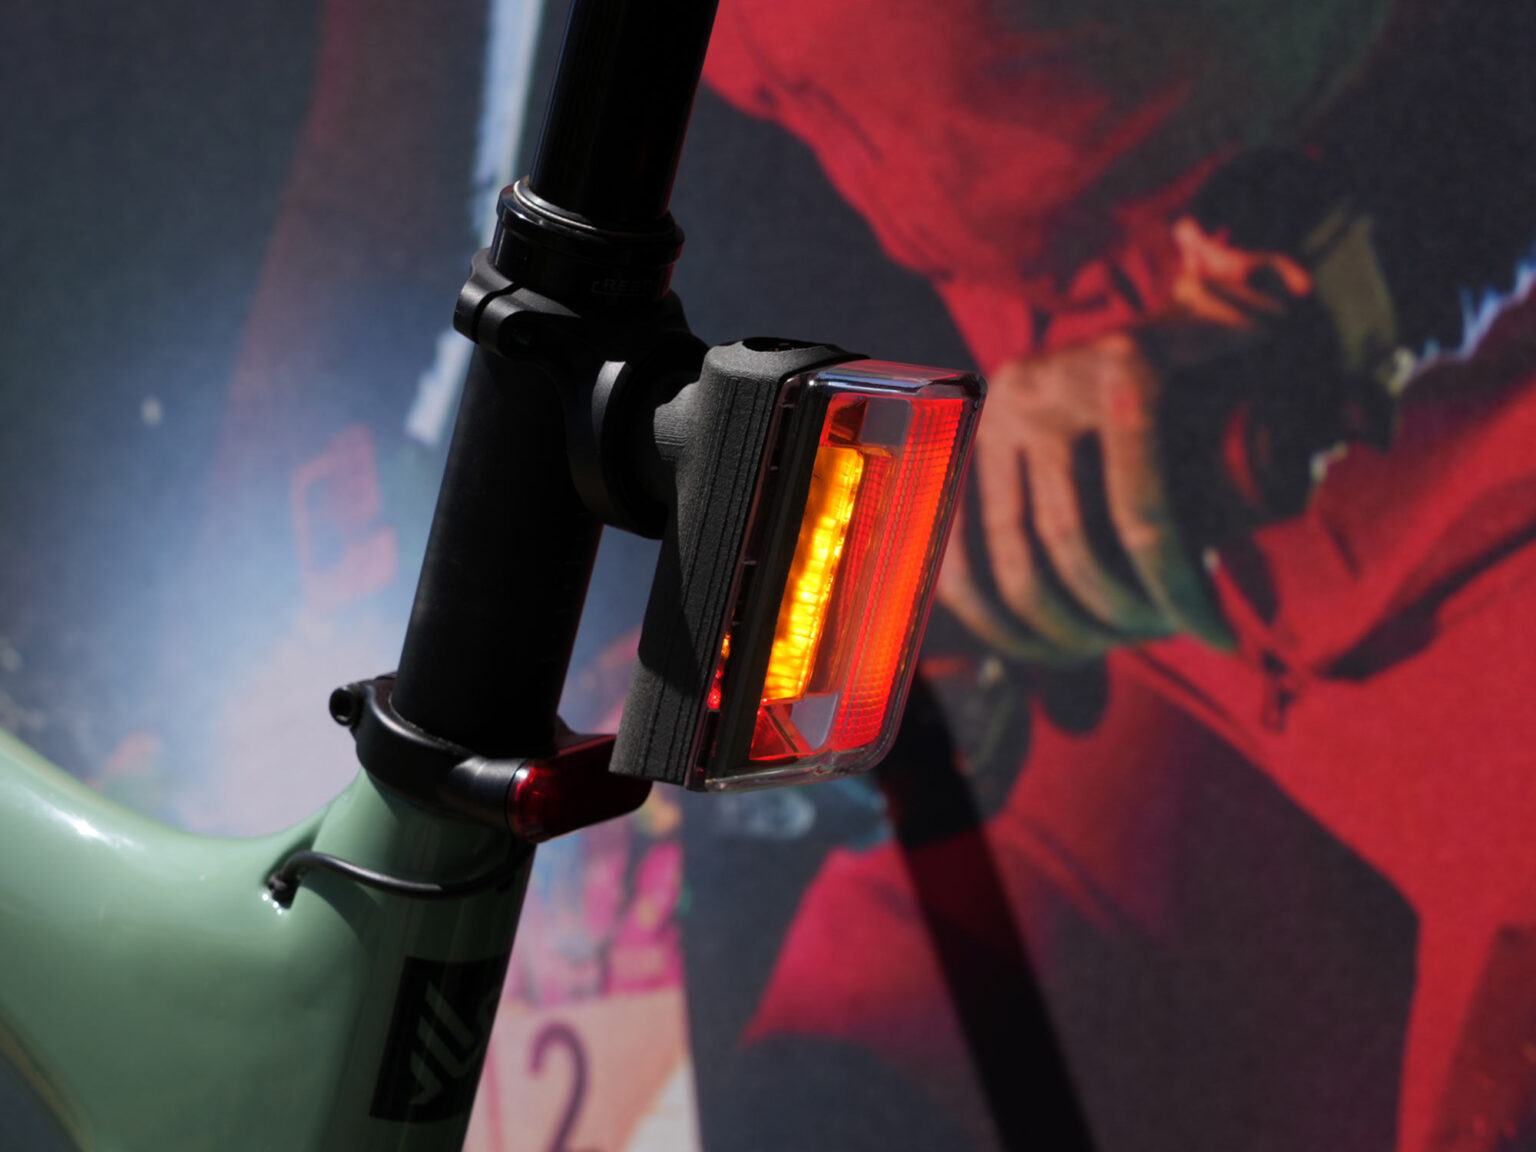 prototype outbound tail light for cyclists